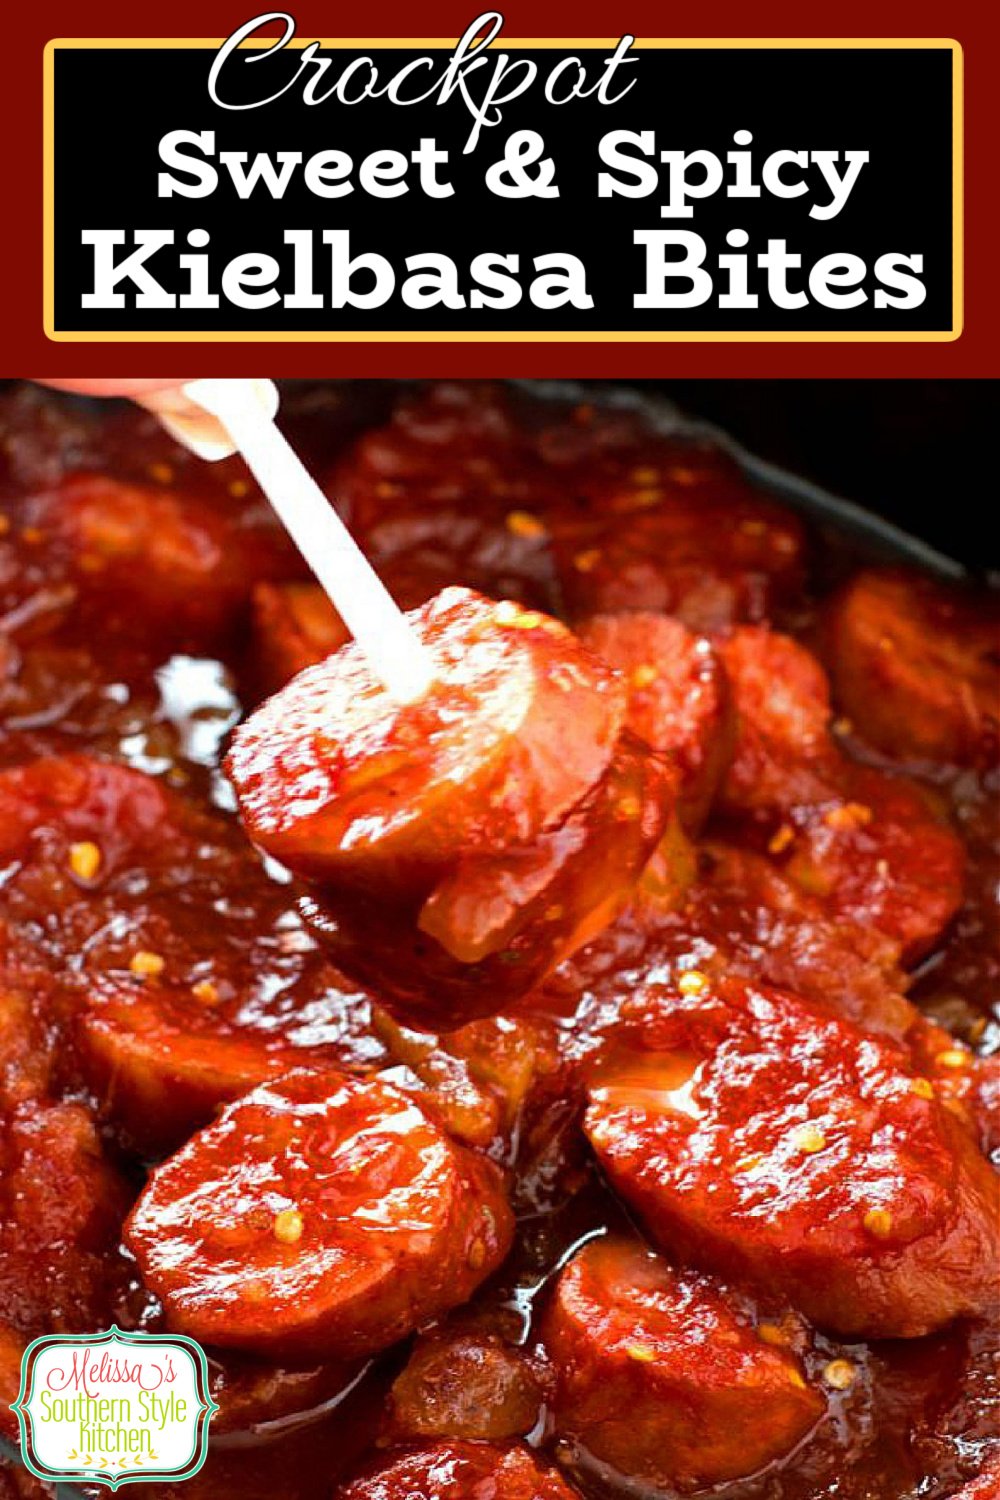 These Crockpot Sweet and Spicy Kielbasa Bites are perfect for casual entertaining, holiday and game day snacking #kielbasabites #crockpotrecipes #recipes #appetizerrecipes #kielbasa #sweetandspicykielbasabites #sausages #slowcookerrecipes #southernfood #southernrecipes #footballfood #newyearseve #partyfoodrecipes